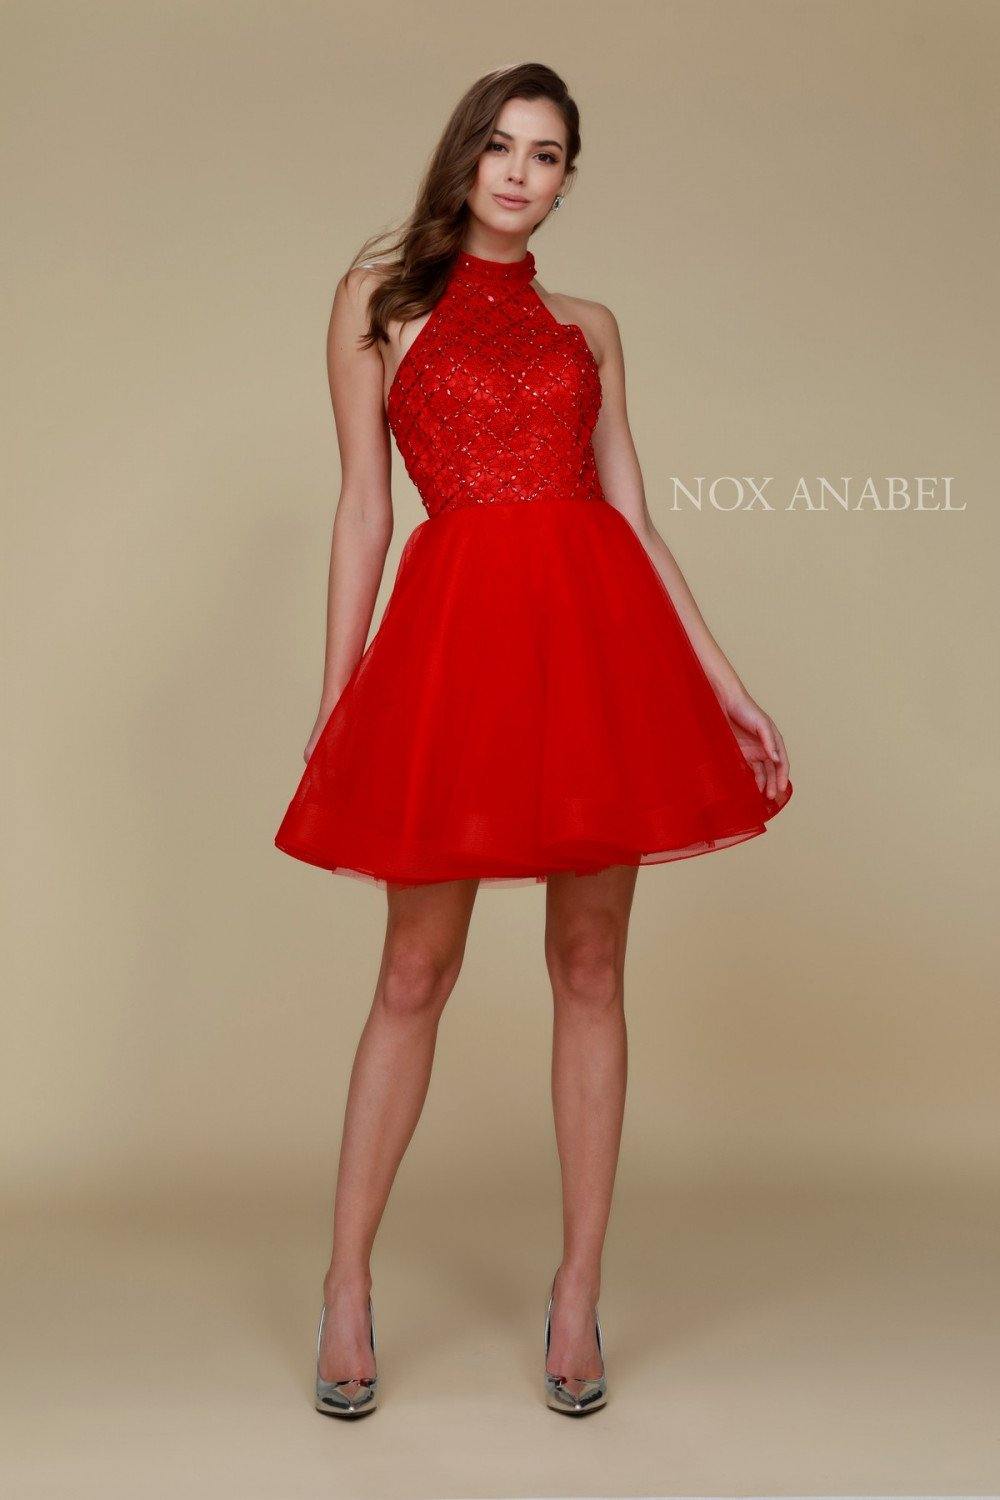 Formal Short Dress Prom Cocktail Red - The Dress Outlet Nox Anabel